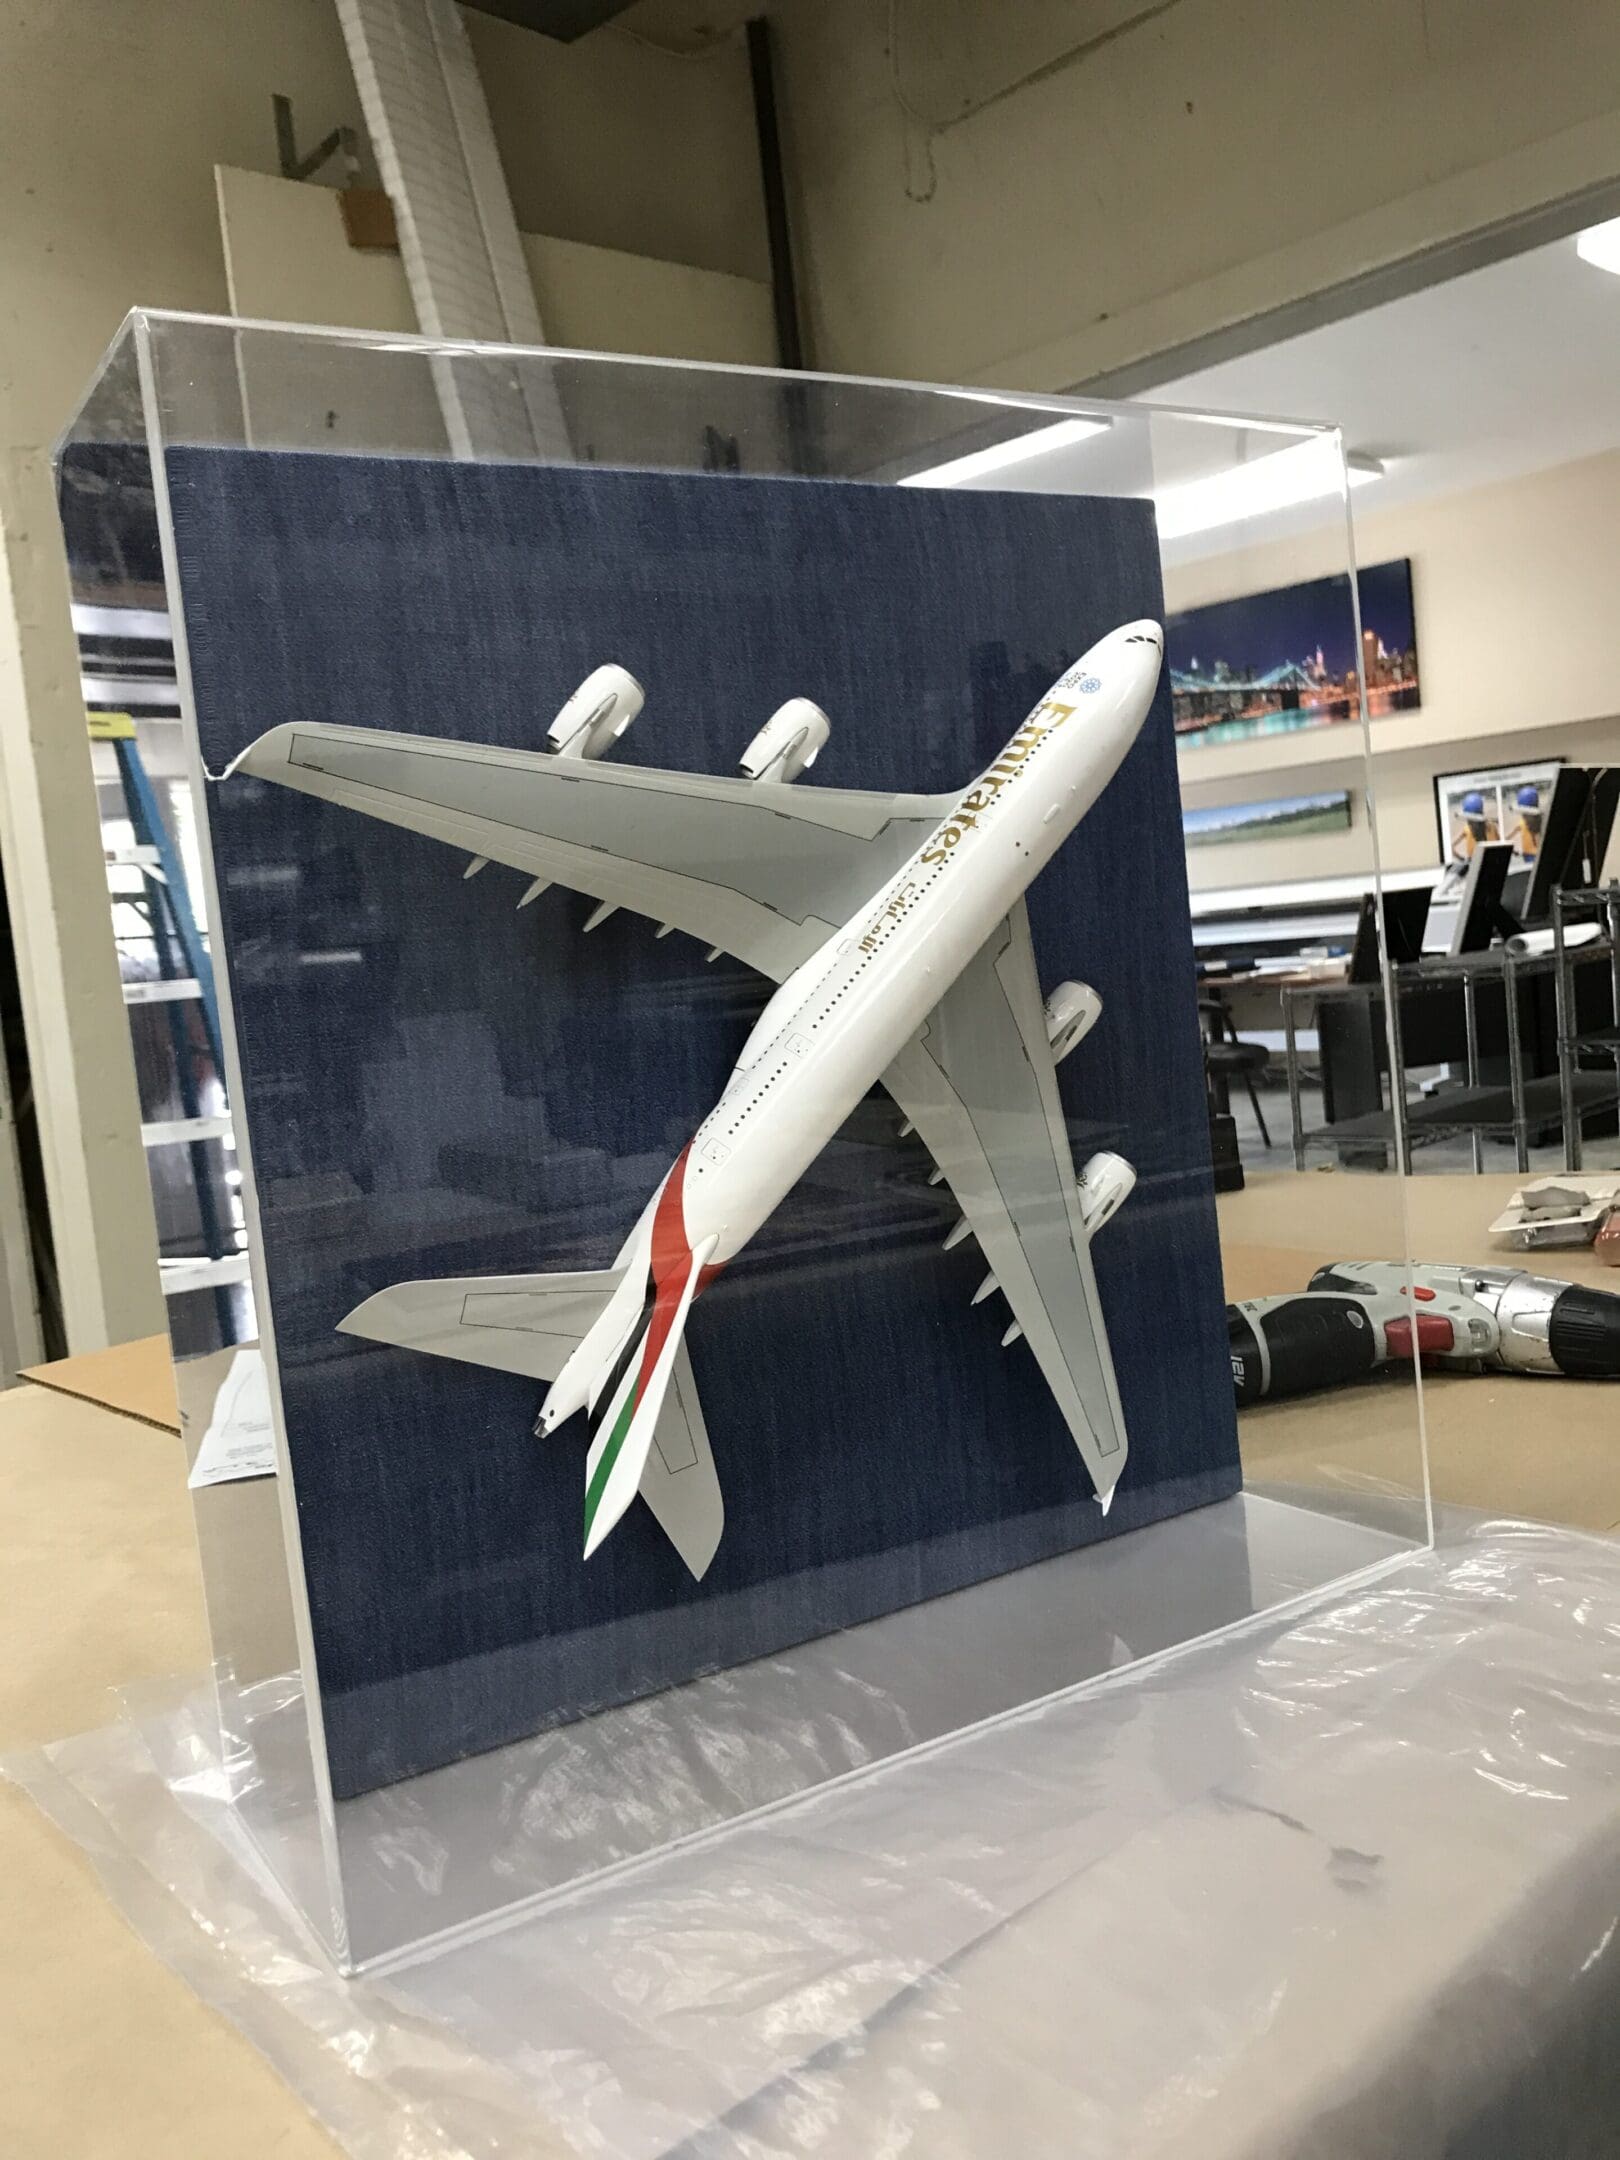 A model airplane is displayed in a case.